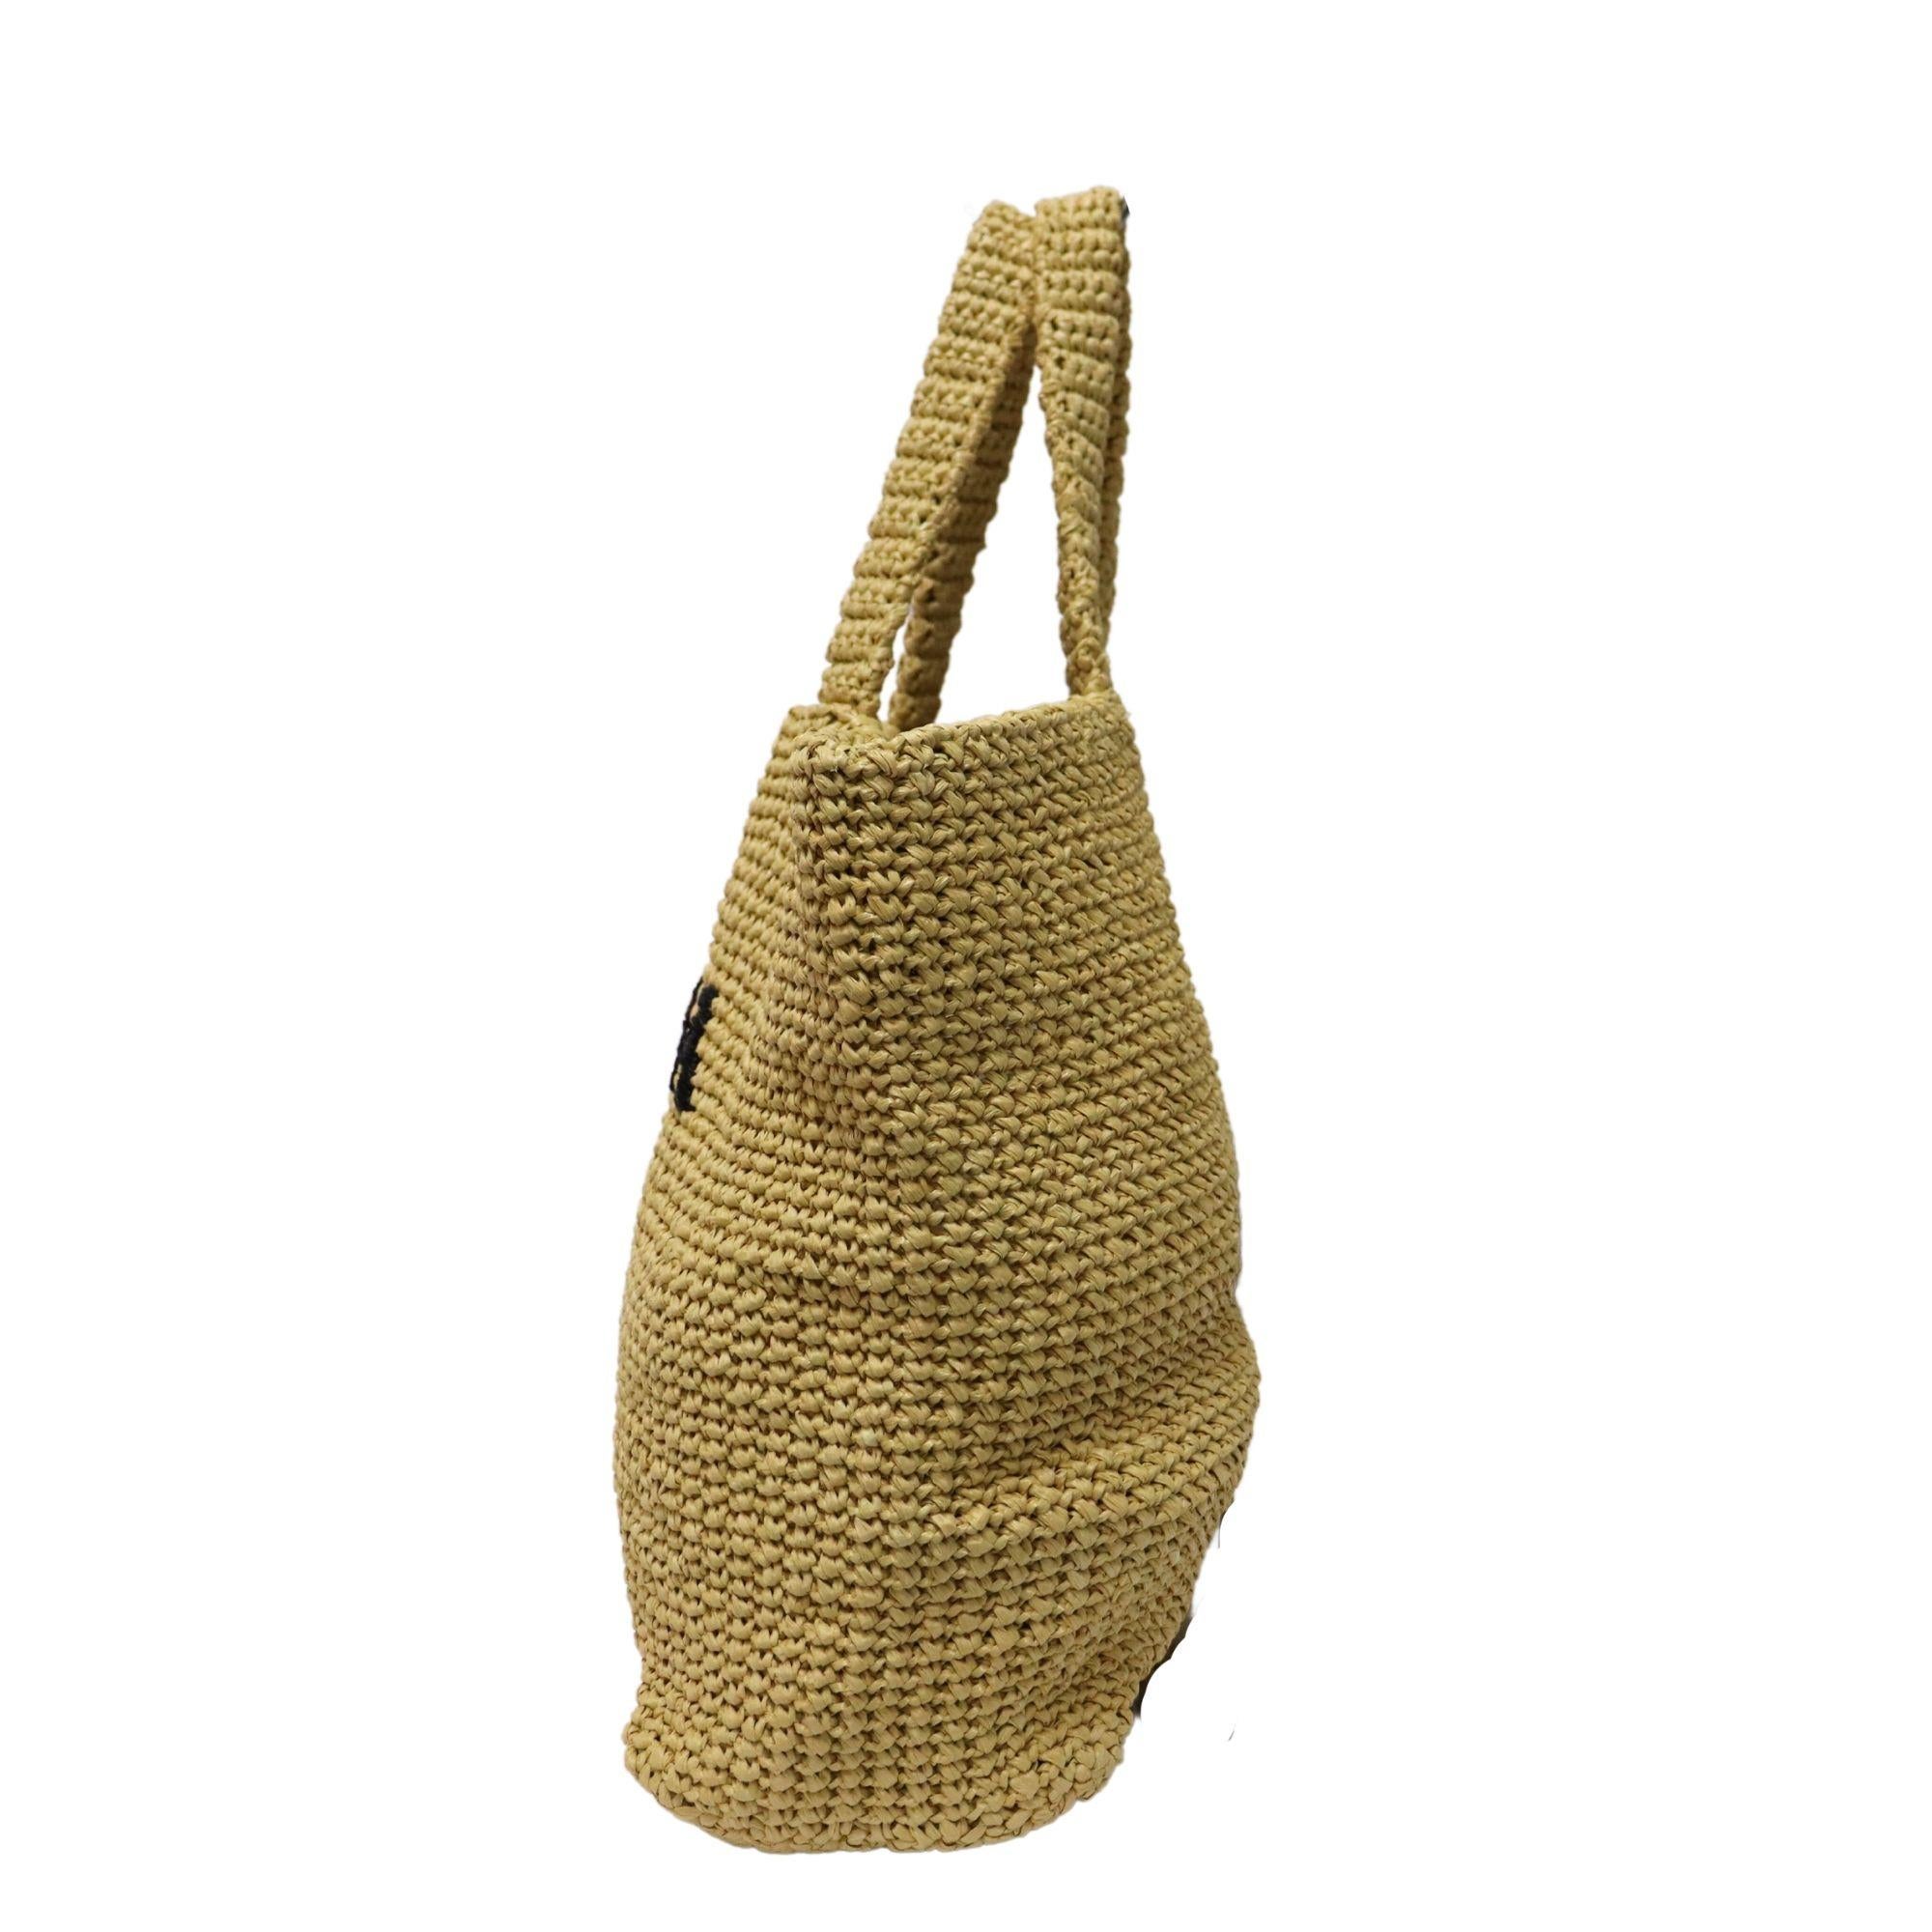 The perfect summer bag. This Prada raffia tote features light weight raffia material, embroidered iconic large front Prada lettering, and side Prada logo plague. Spacious interior.

Measurements:
Height: 34cm
Length: 16cm
Width: 40cm